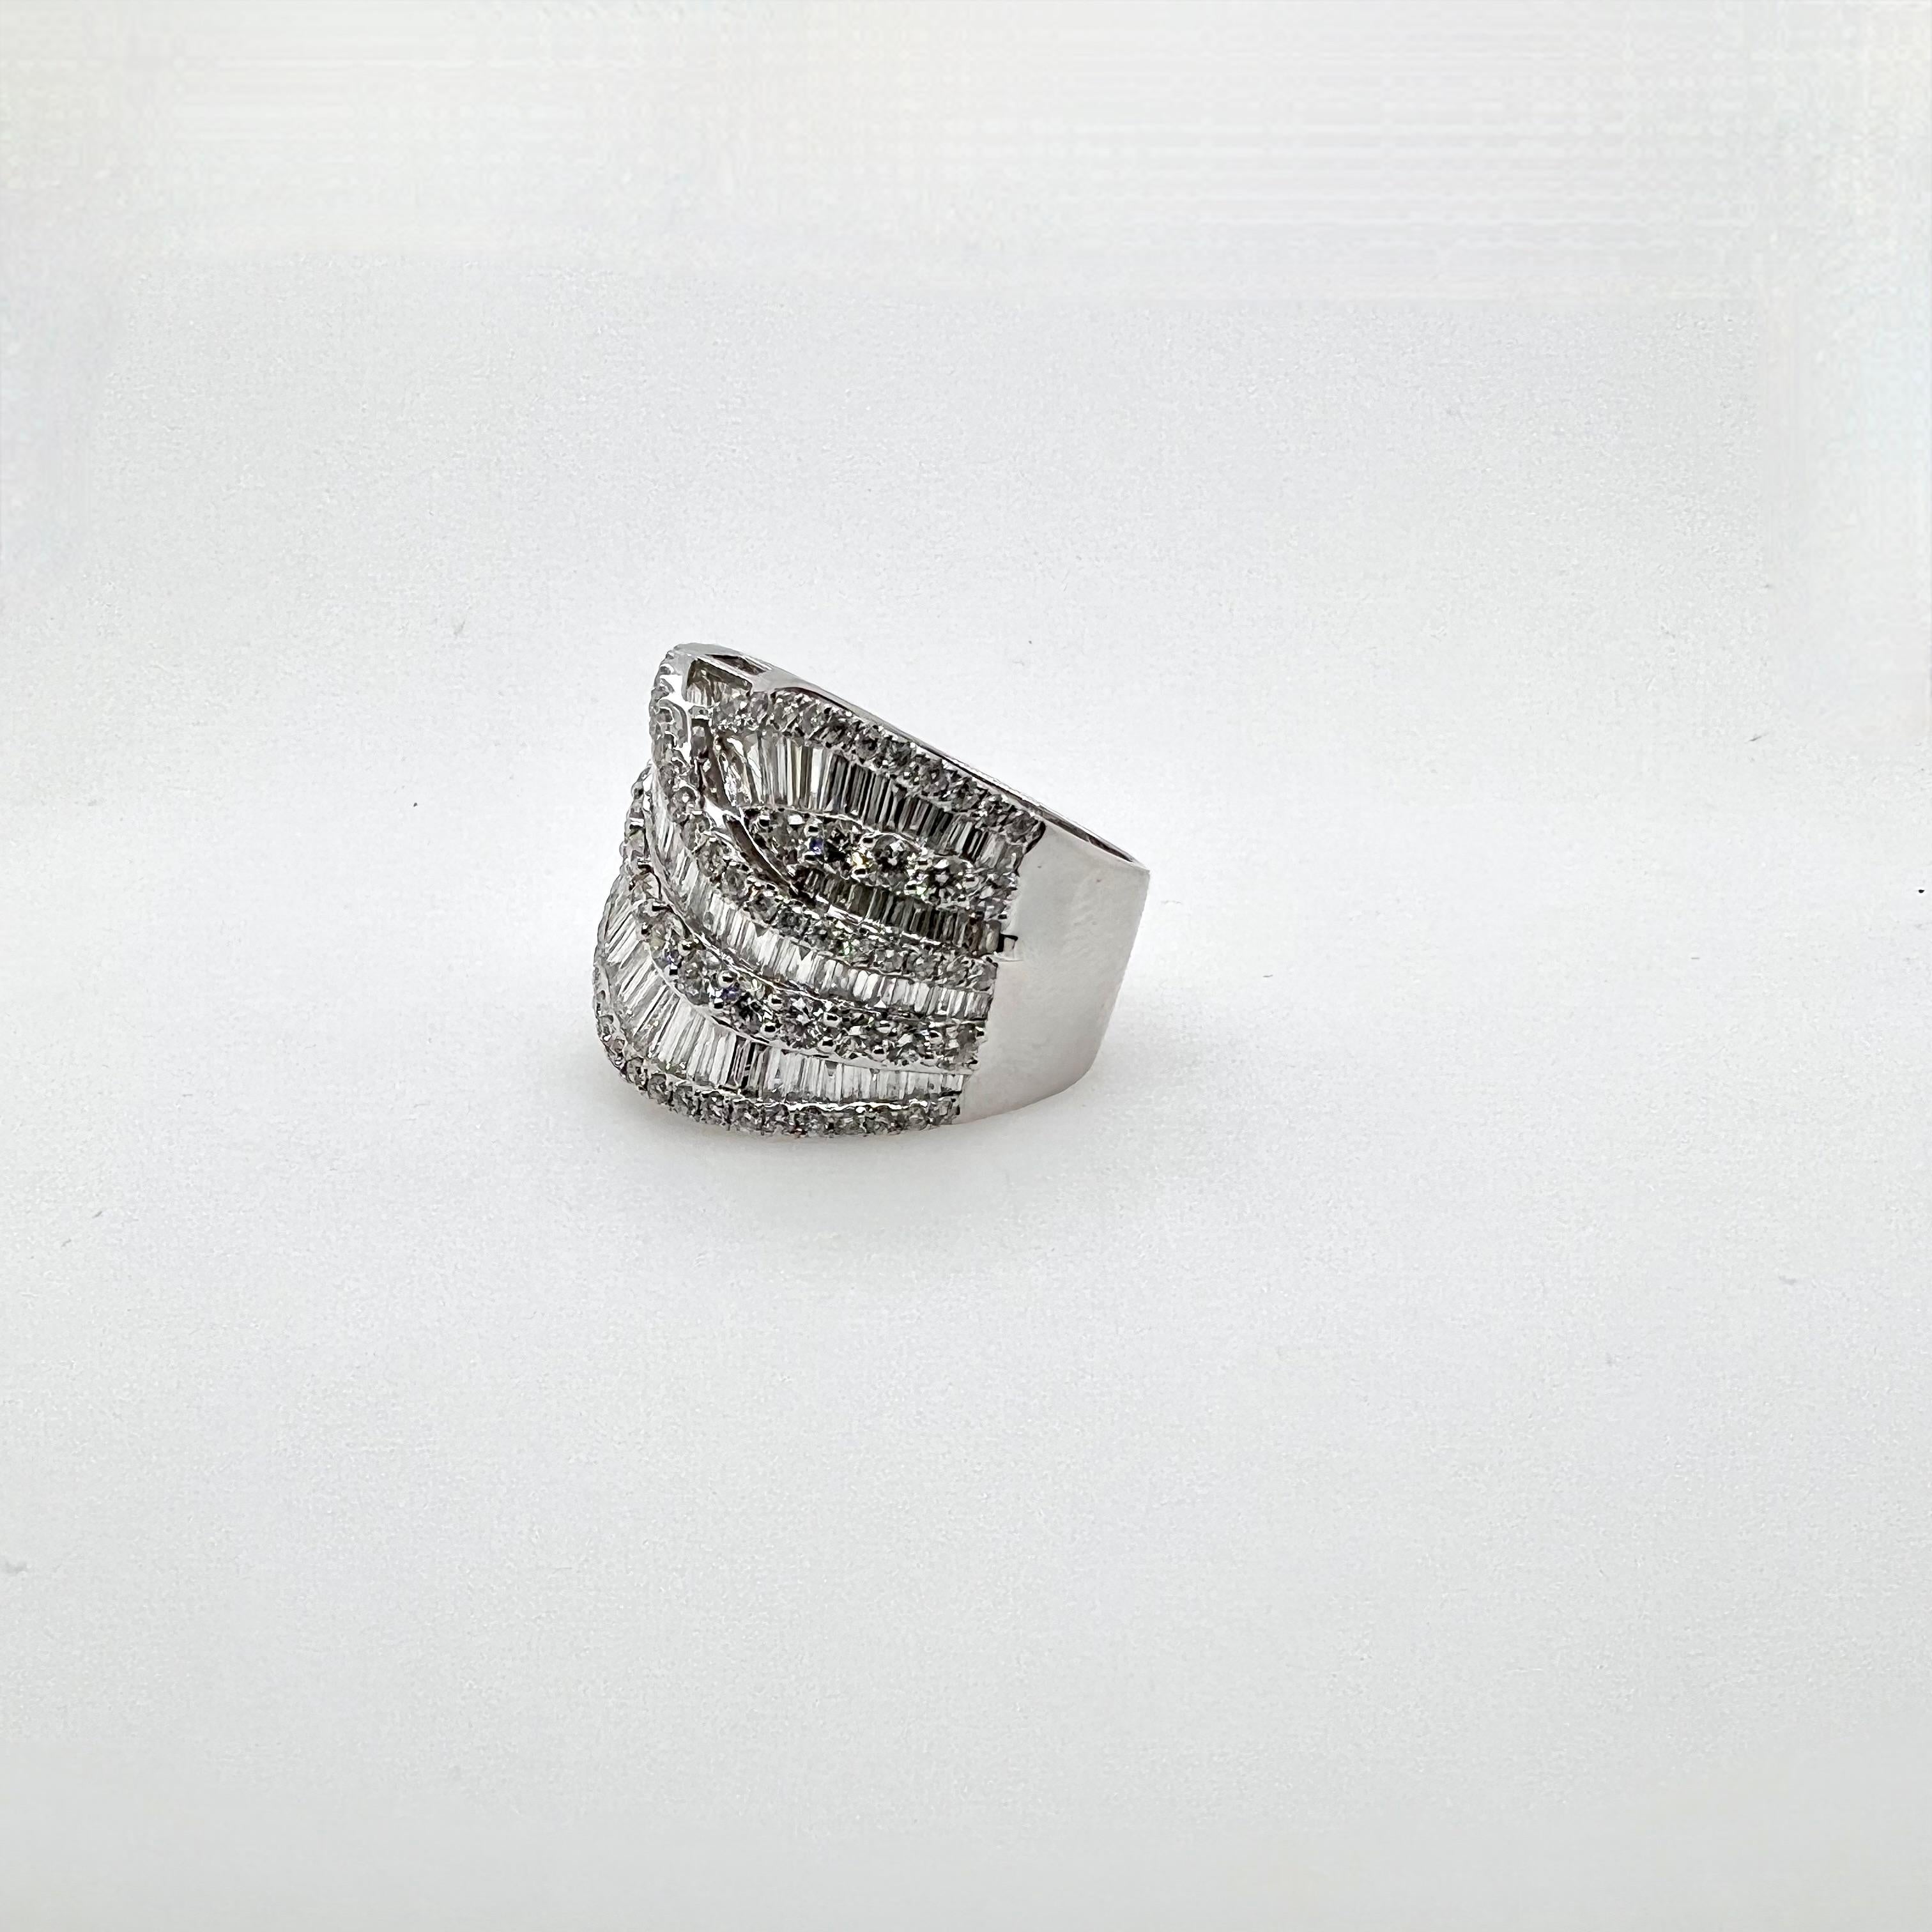 This 18k white gold diamond is elegantly made with a beautiful crossover pattern.  The baguettes and round brilliant diamonds are meticulously set and the pattern makes the ring versatile to wear for casual or business casual events.  This would be